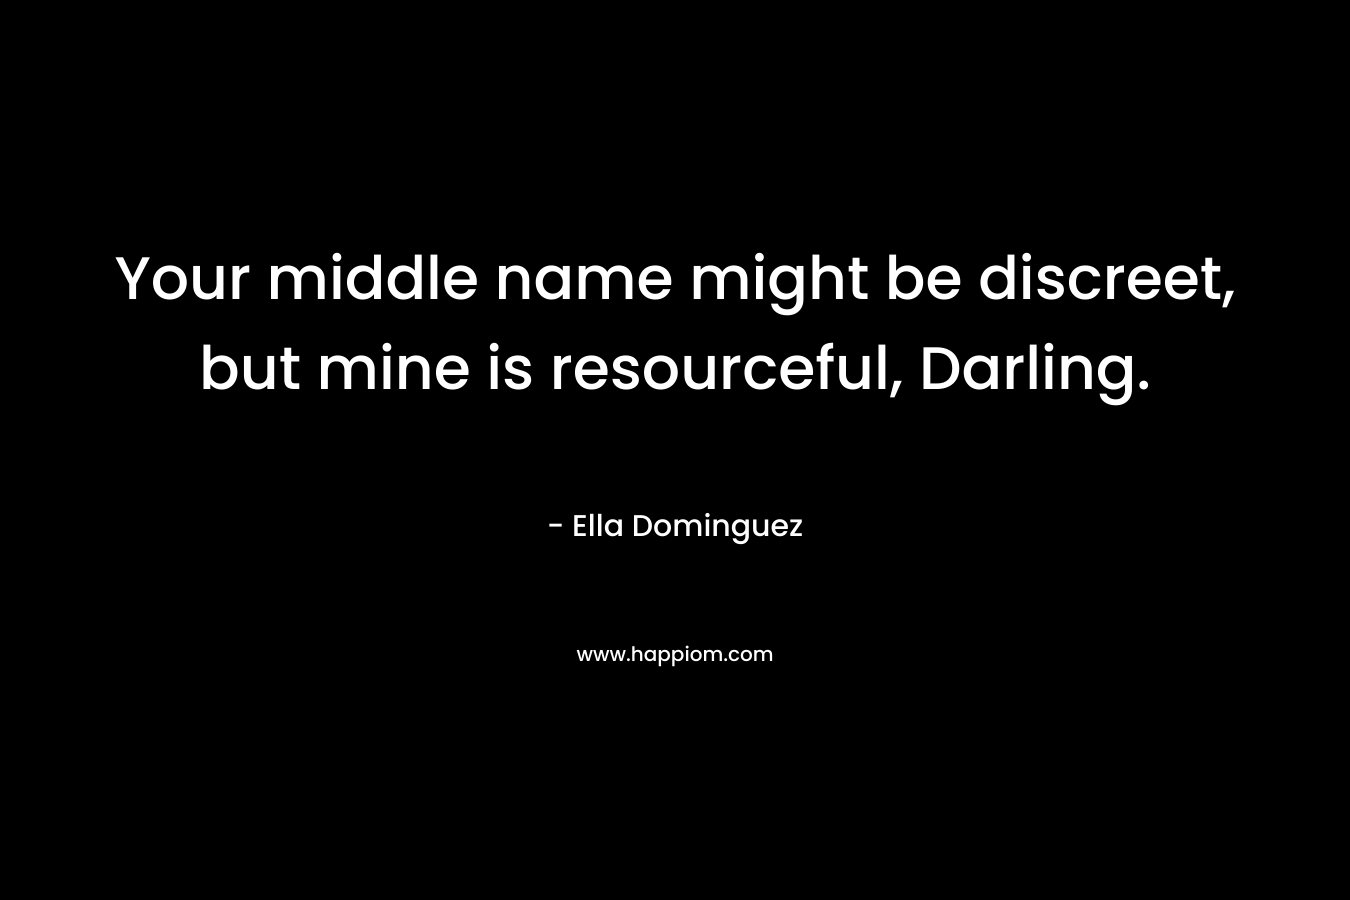 Your middle name might be discreet, but mine is resourceful, Darling.